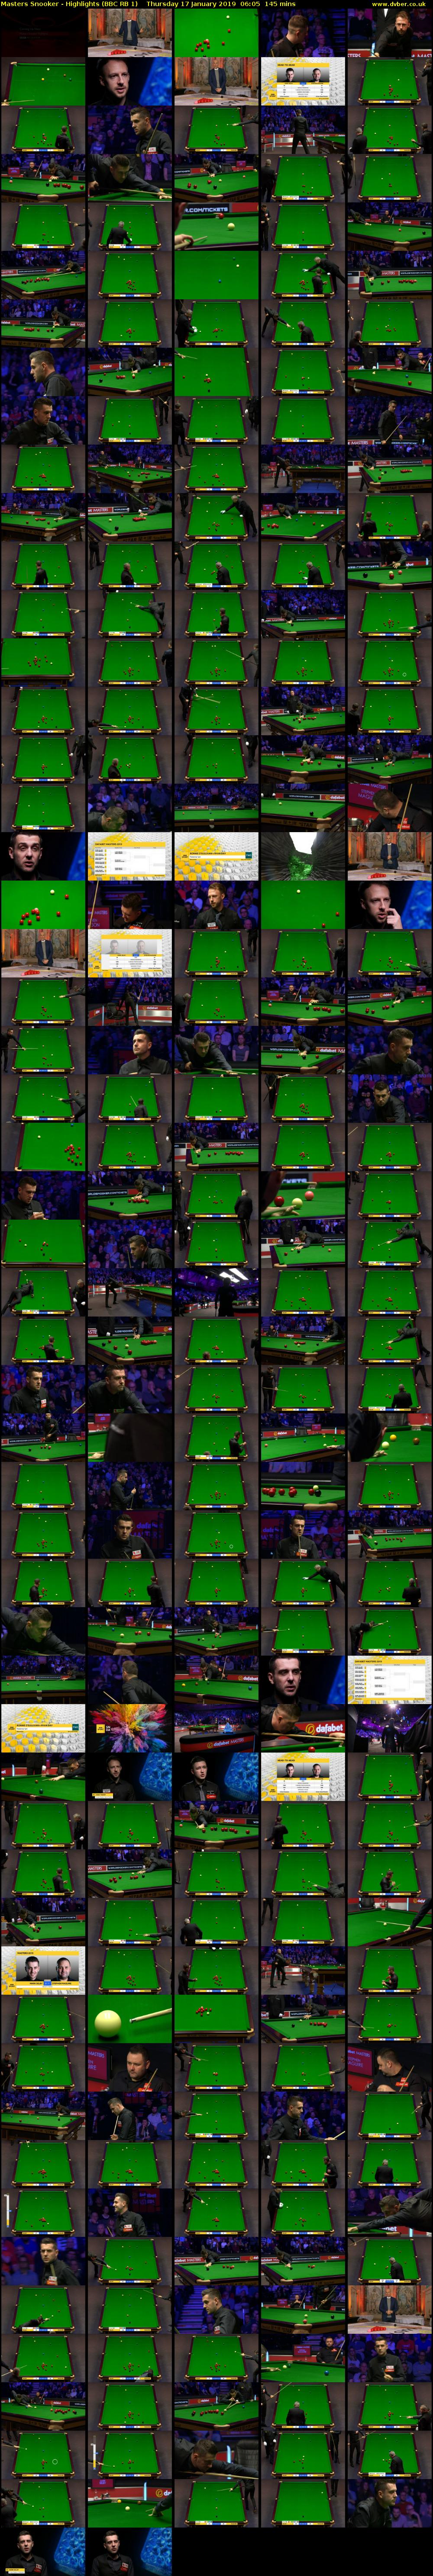 Masters Snooker - Highlights (BBC RB 1) Thursday 17 January 2019 06:05 - 08:30